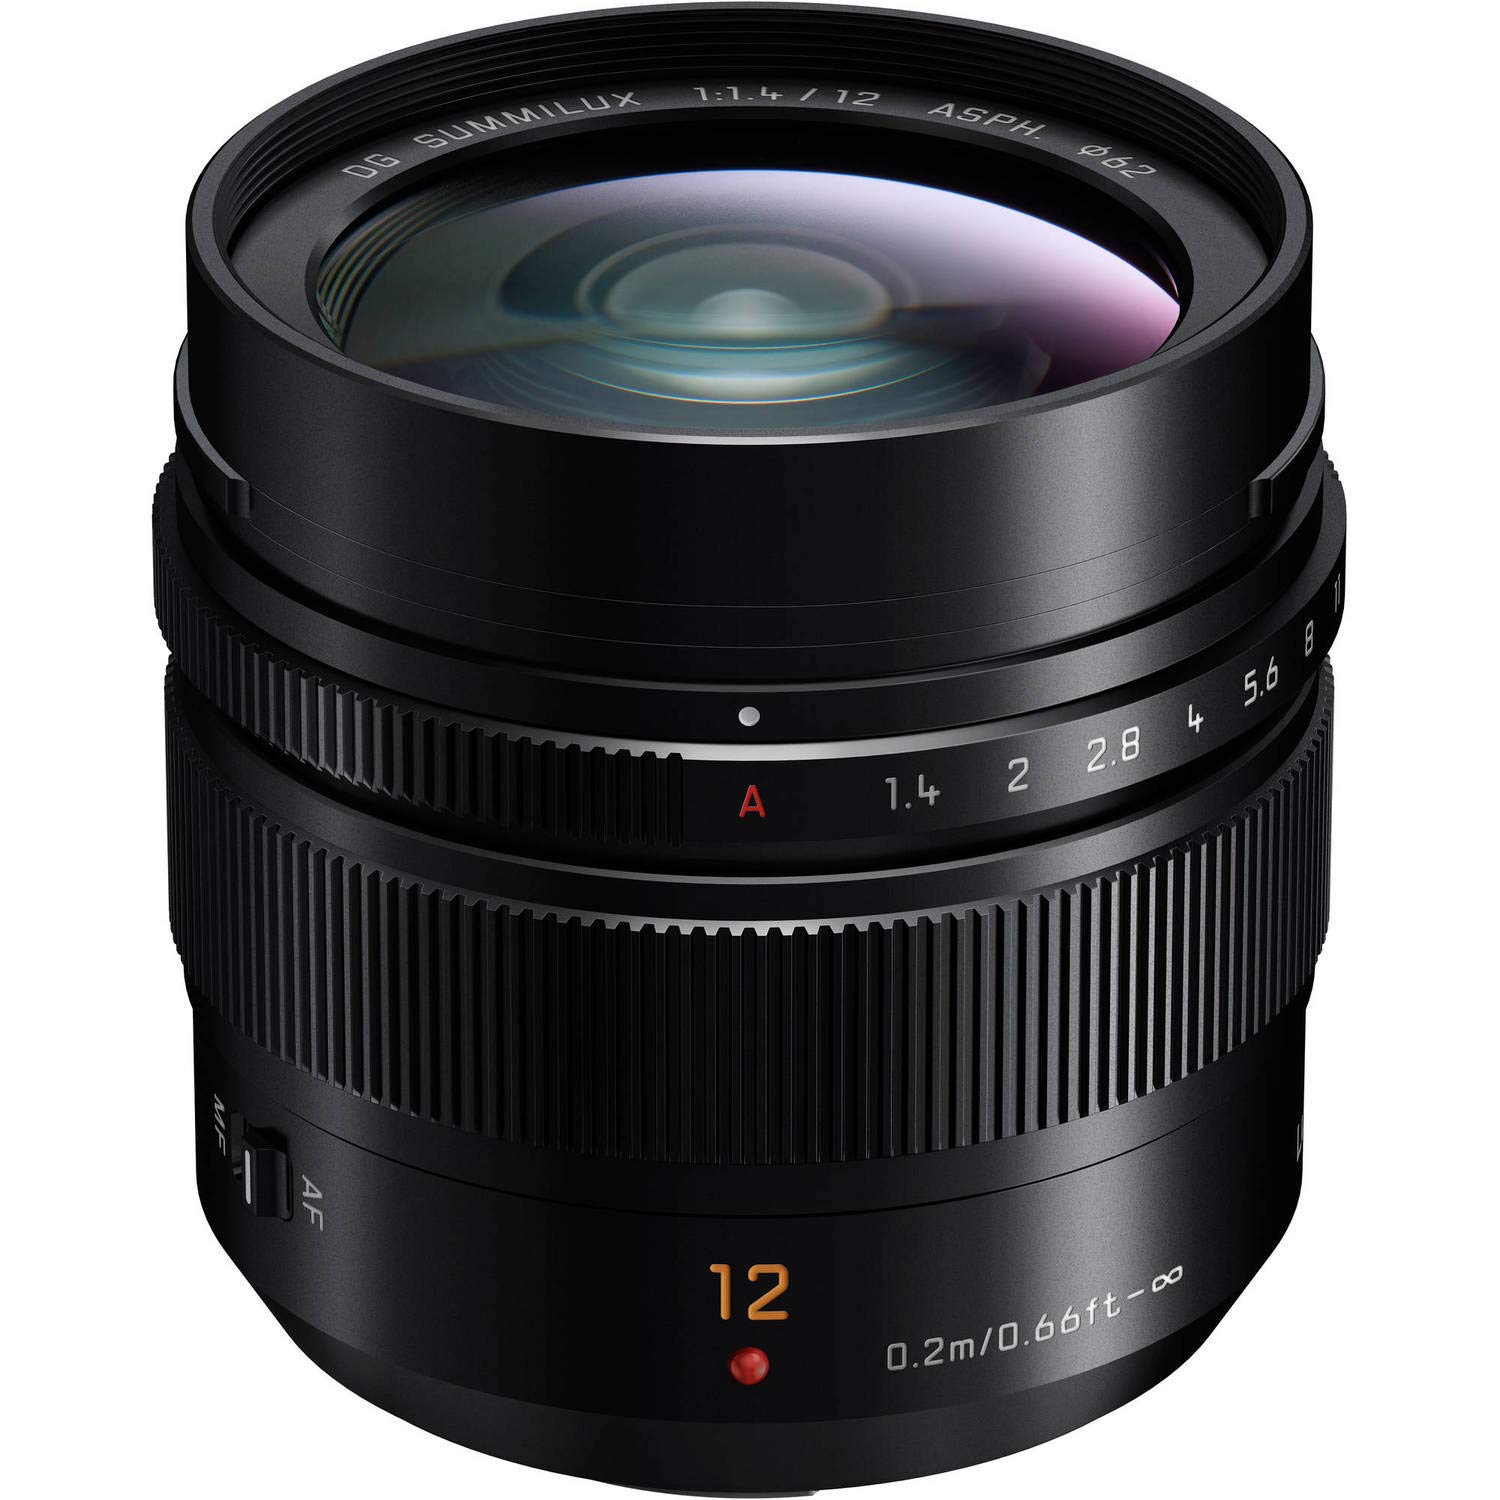 Panasonic Leica DG Summilux 12mm f/1.4 ASPH. Lens With Cleaning Kit